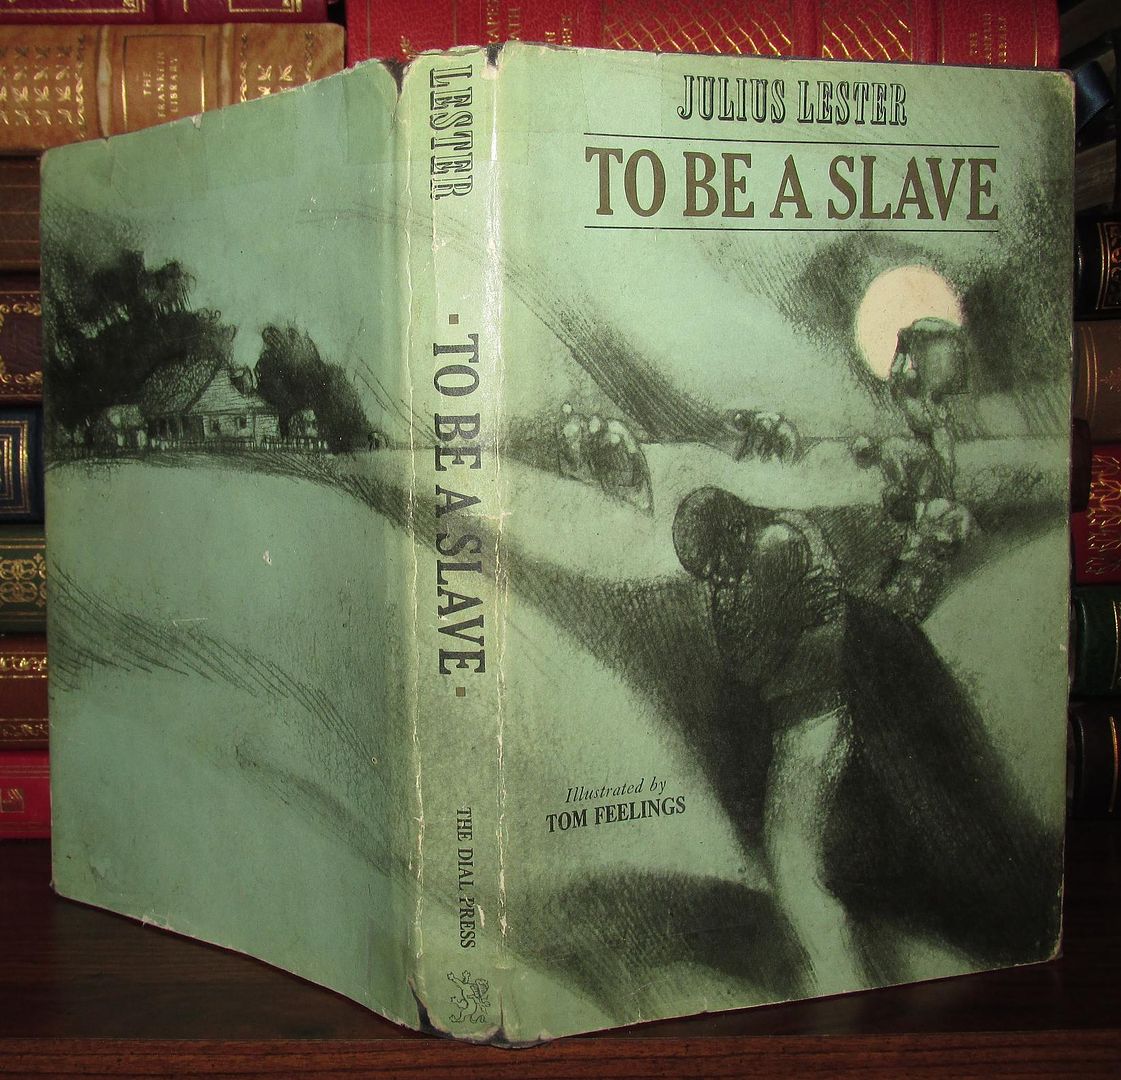 LESTER, JULIUS - To Be a Slave